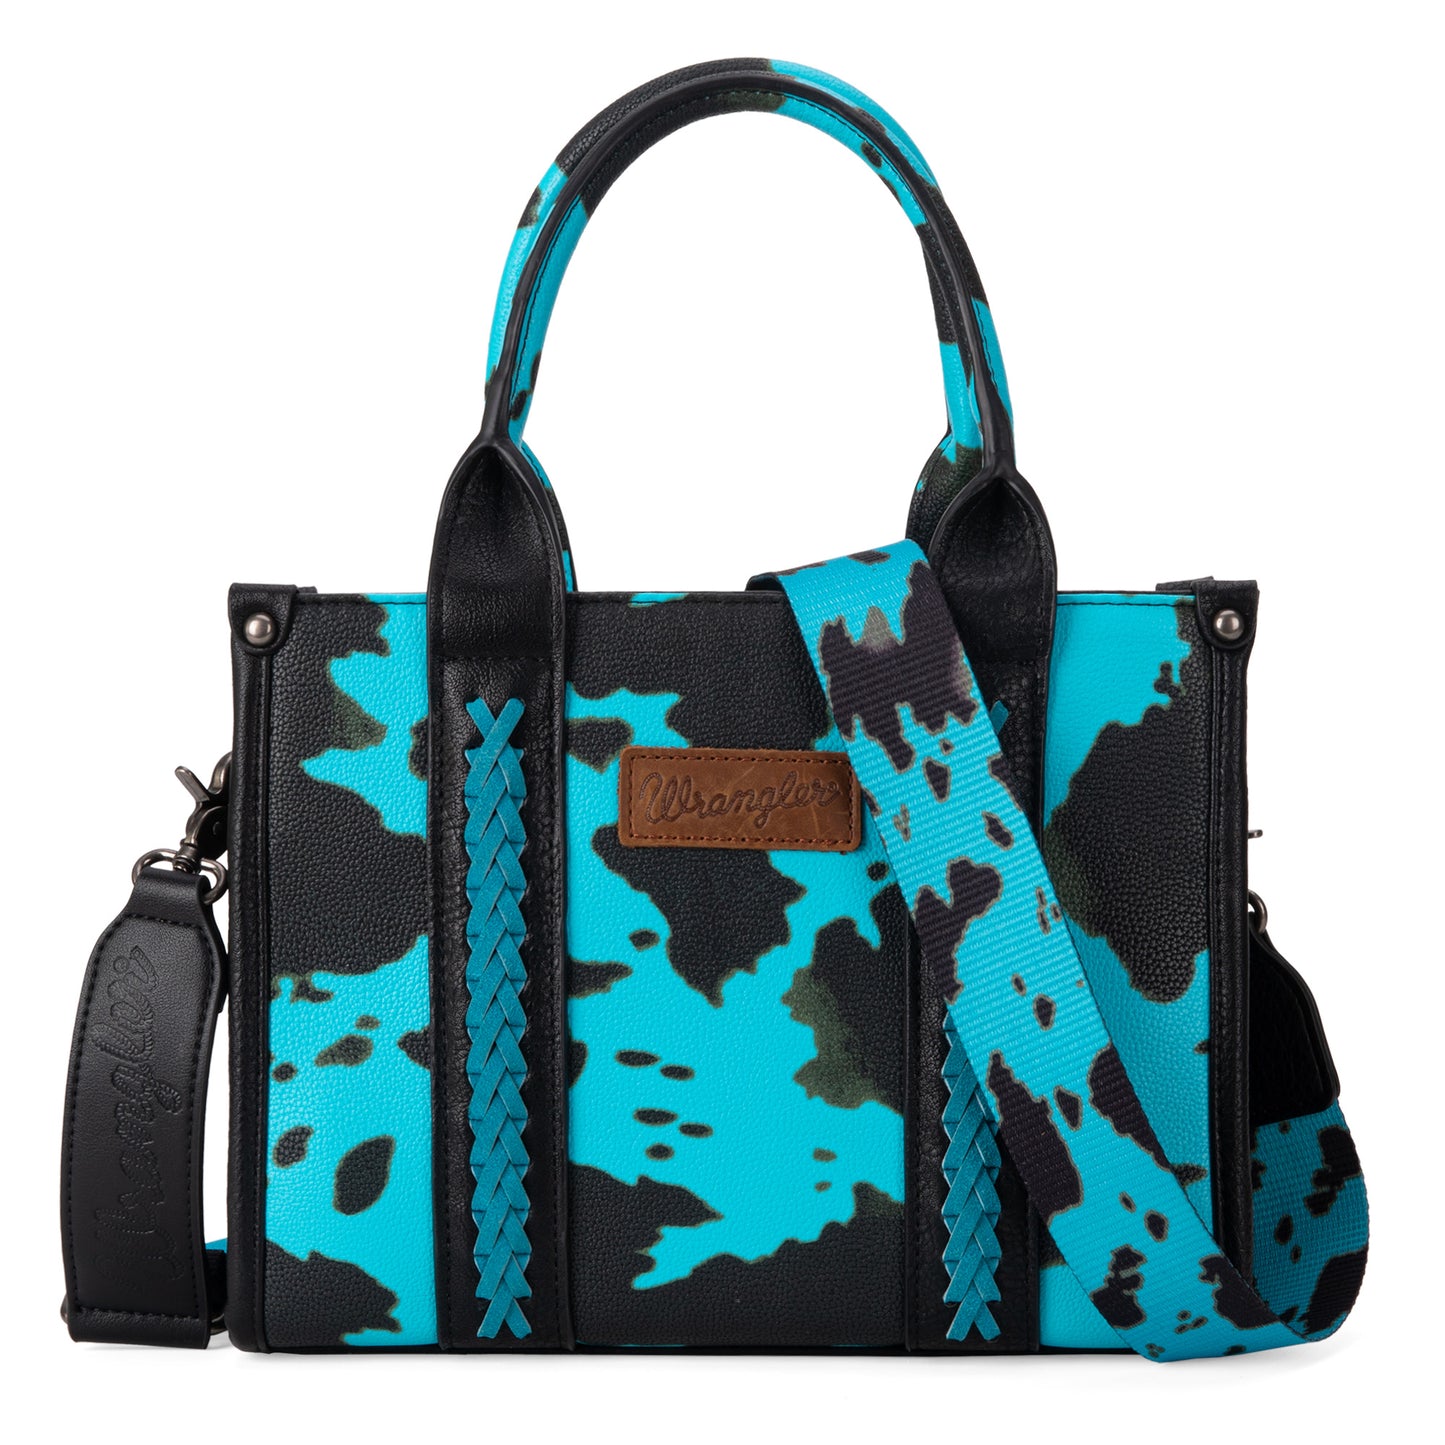 Wrangler Cow Print Concealed Carry Tote/Crossbody Bag